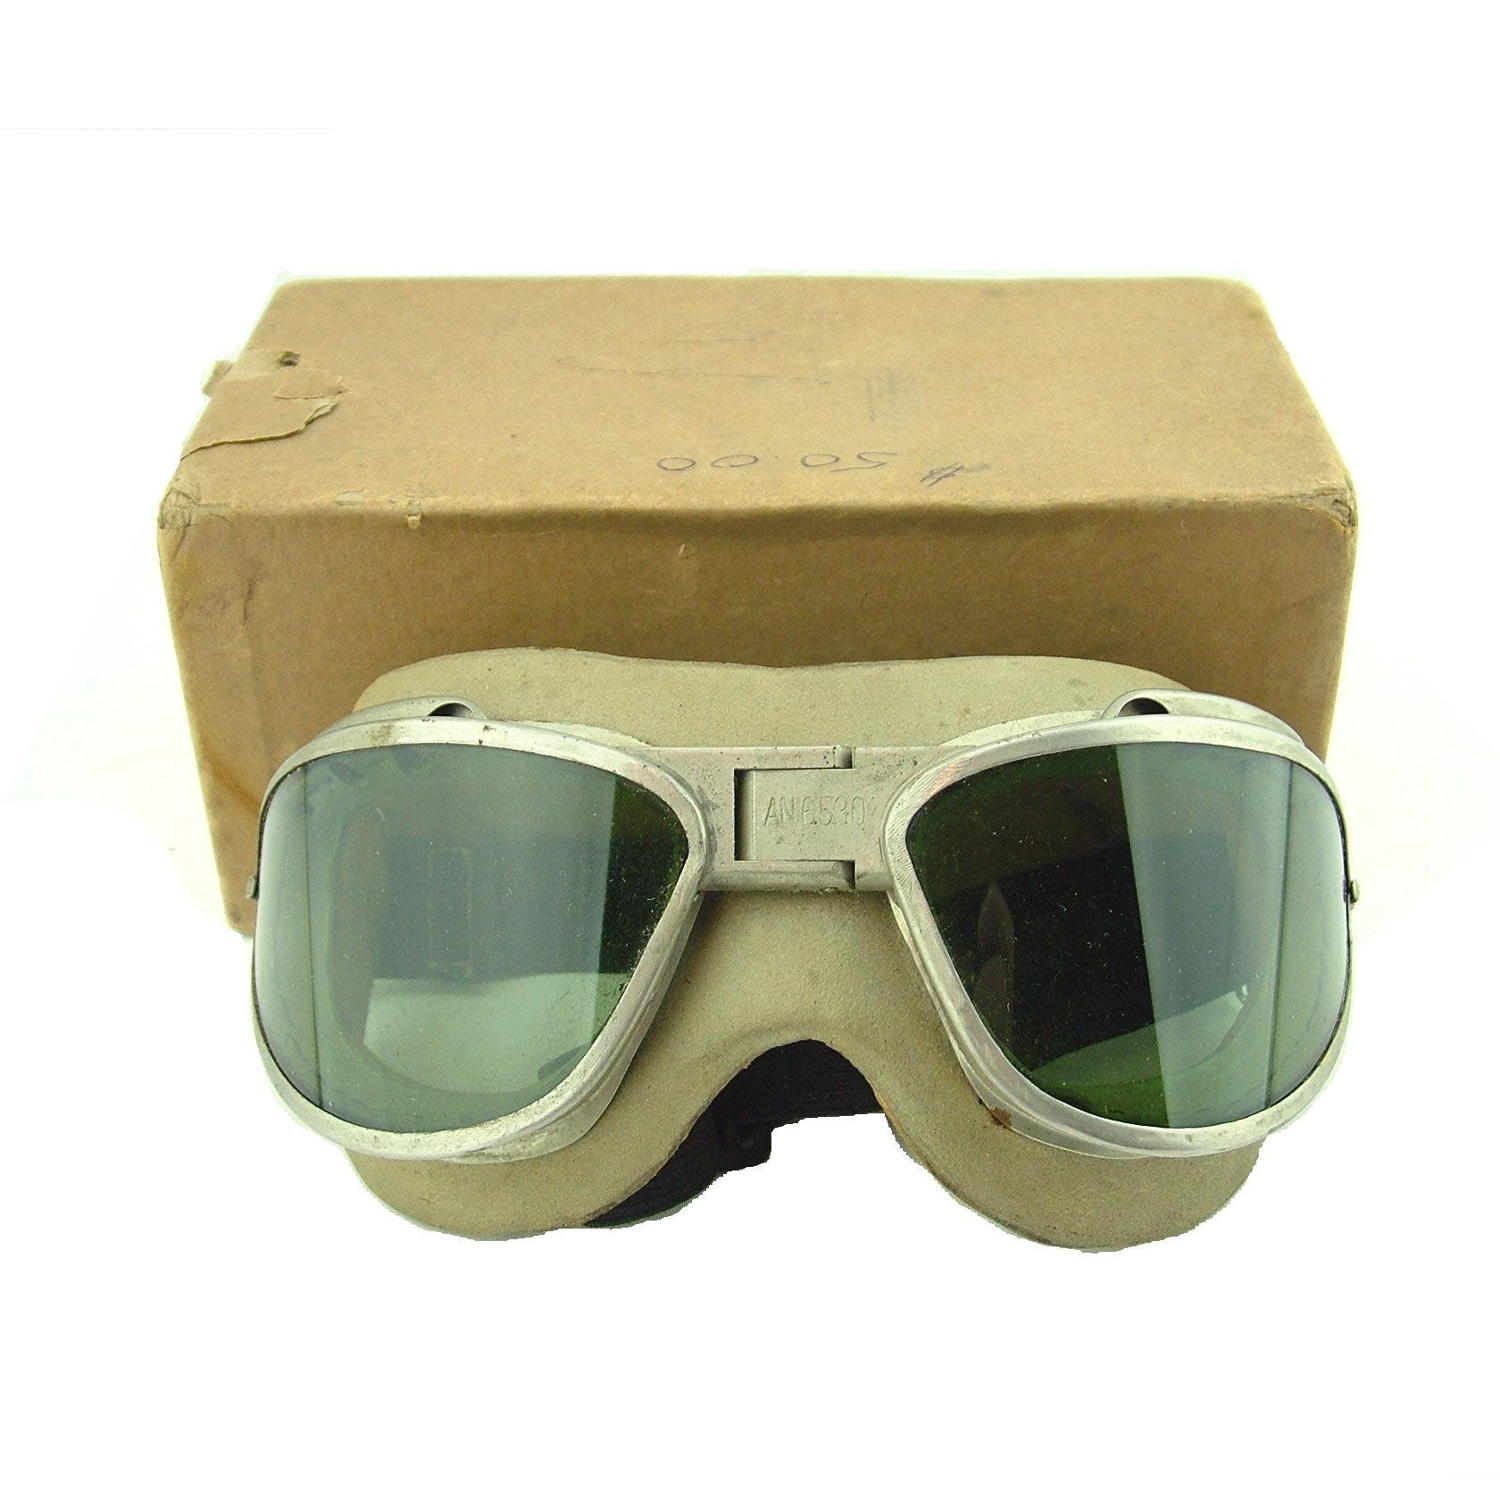 USAAF AN6530 flying goggles, boxed